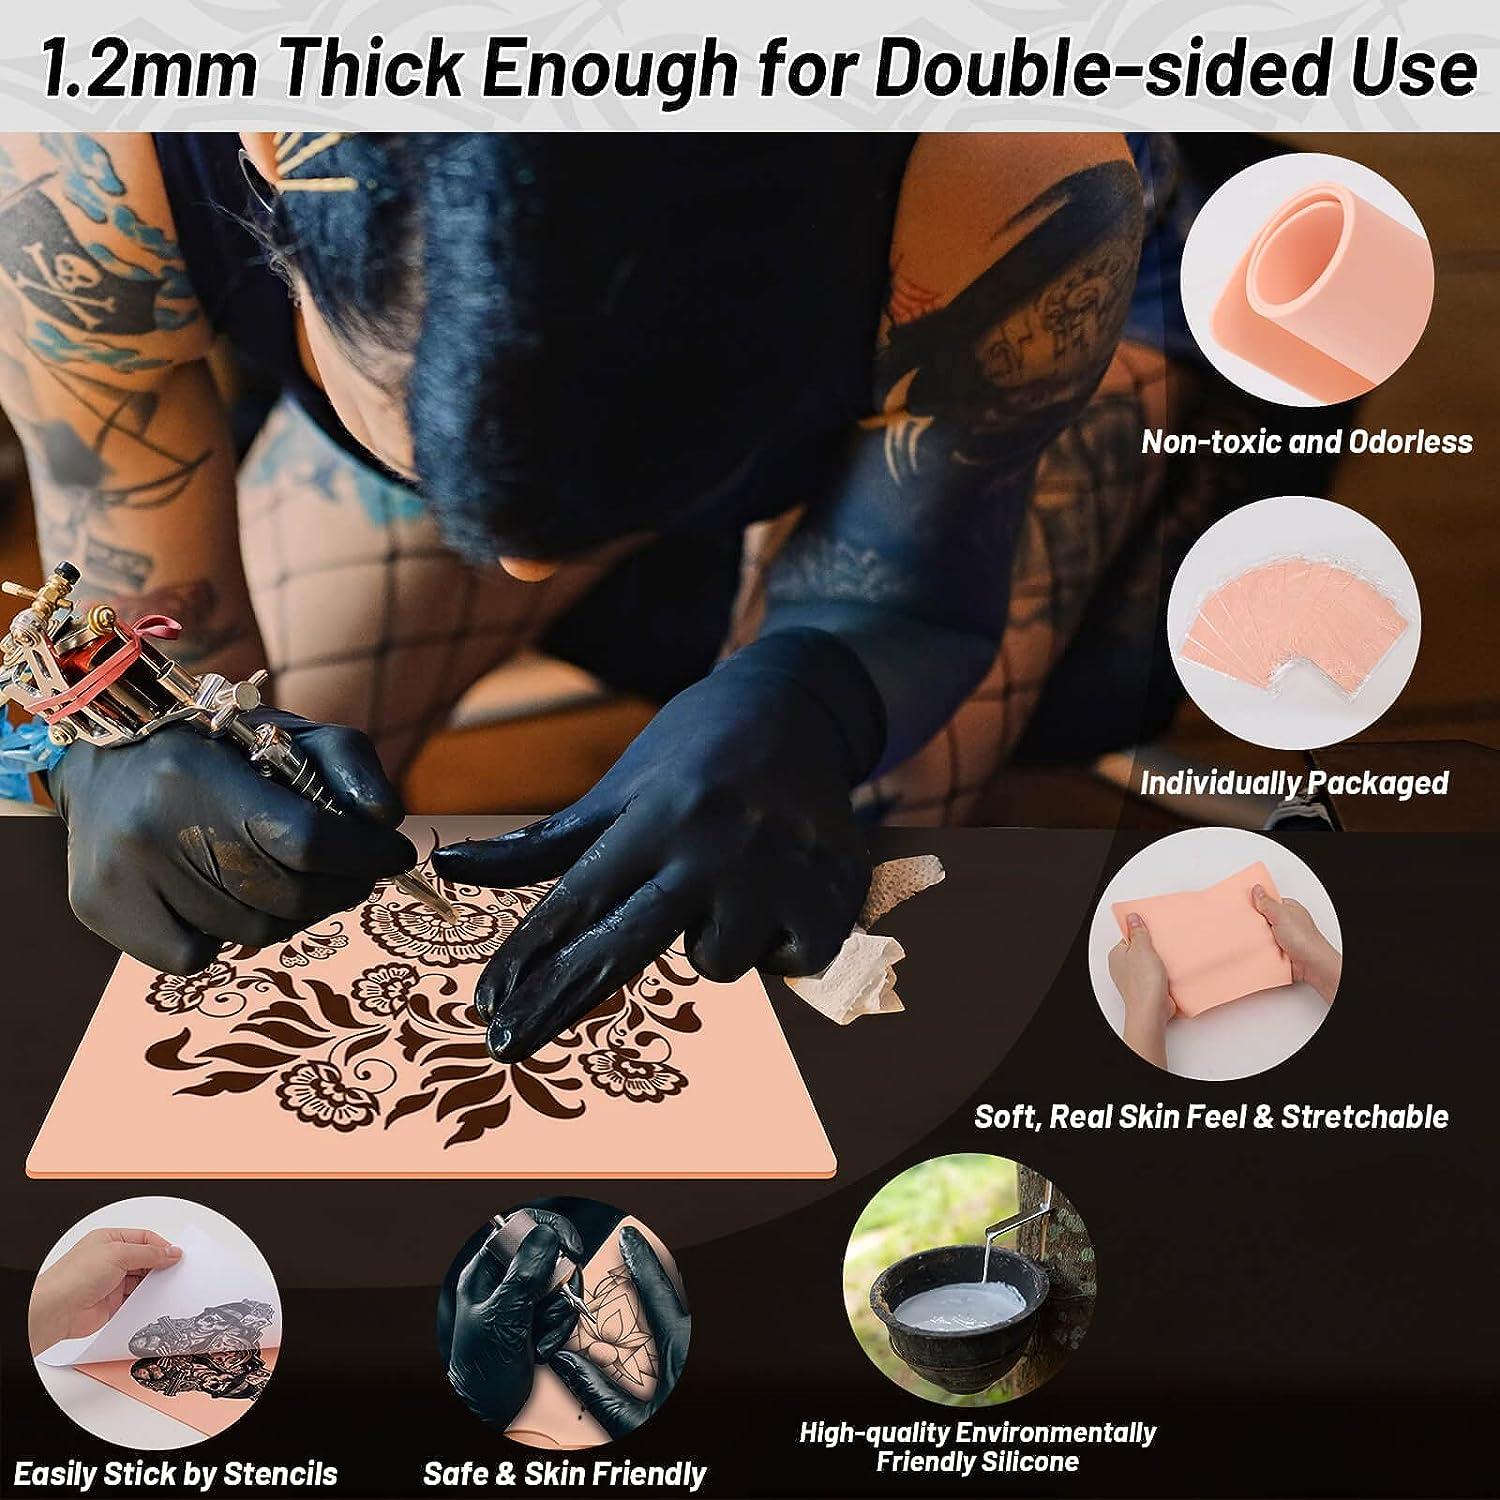 Tattoo practice skin and transfer paper, 45 pieces of tattoo fake